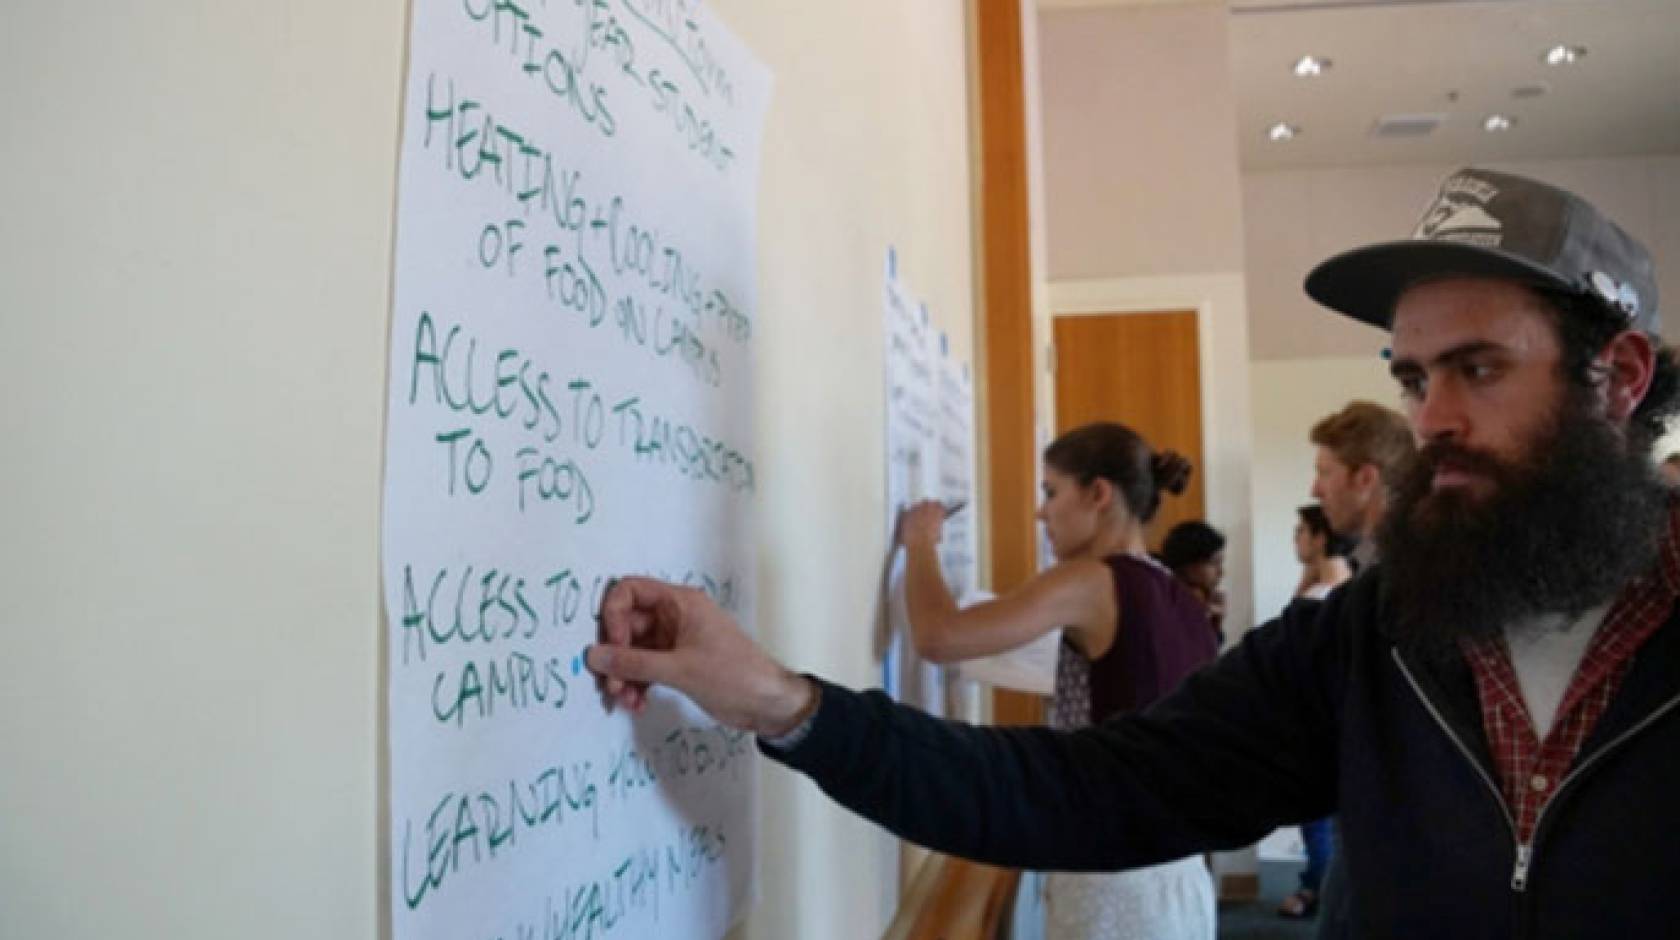 The UCSB Campus Food Justice Forum invited students, staff, faculty and community members to air their concerns about the campus food system and to pose potential solutions. - See more at: http://www.news.ucsb.edu/2015/015324/tackling-food-insecurity#stha